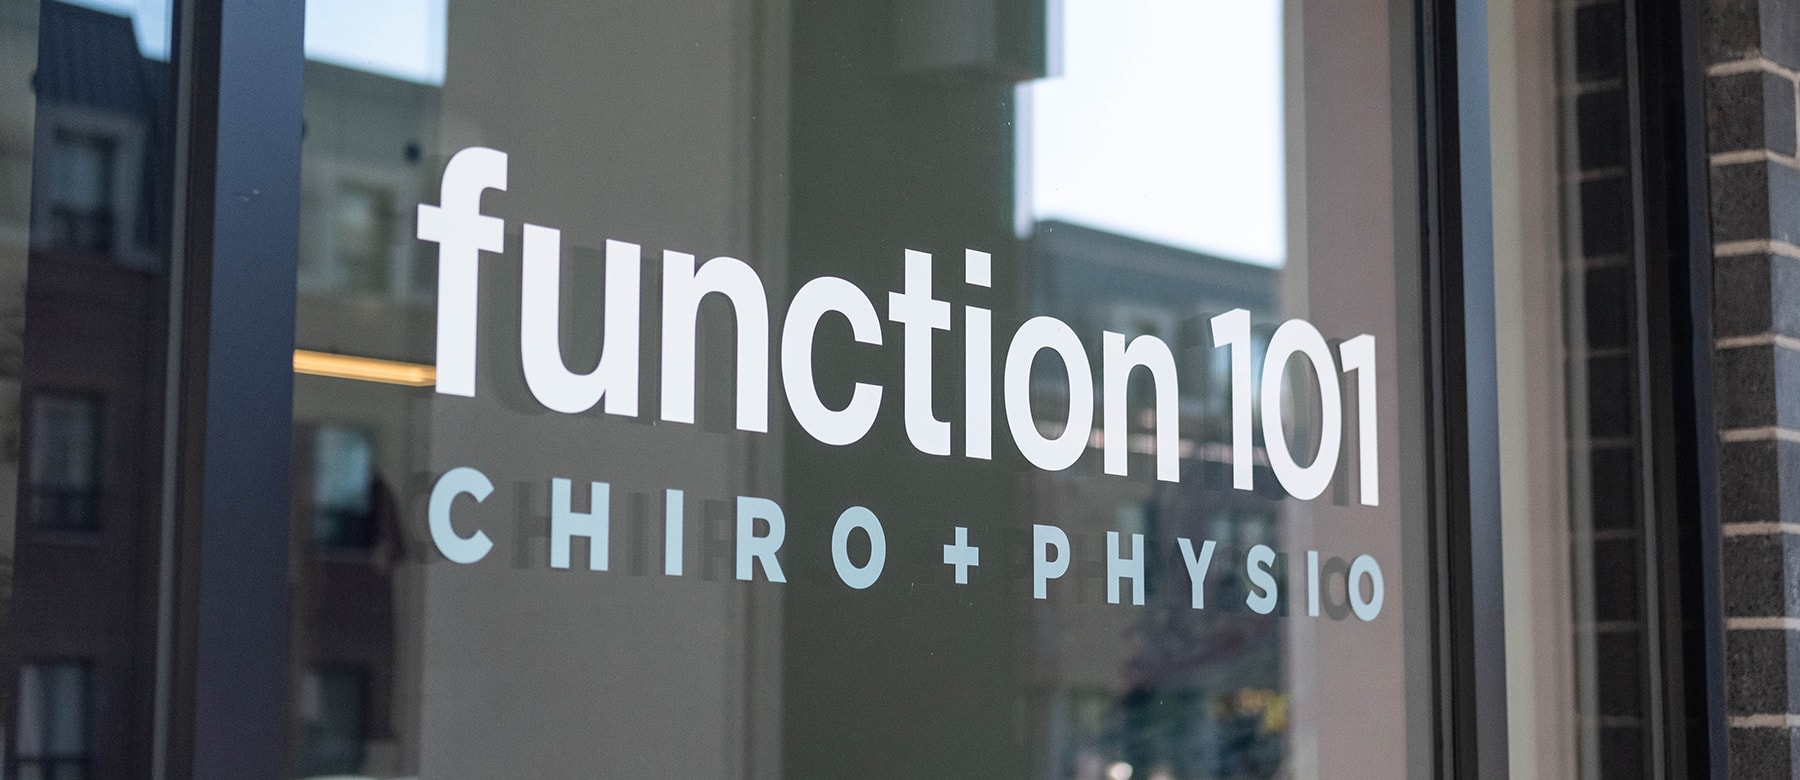 Function101 Chiro + Physio - Contact Us!